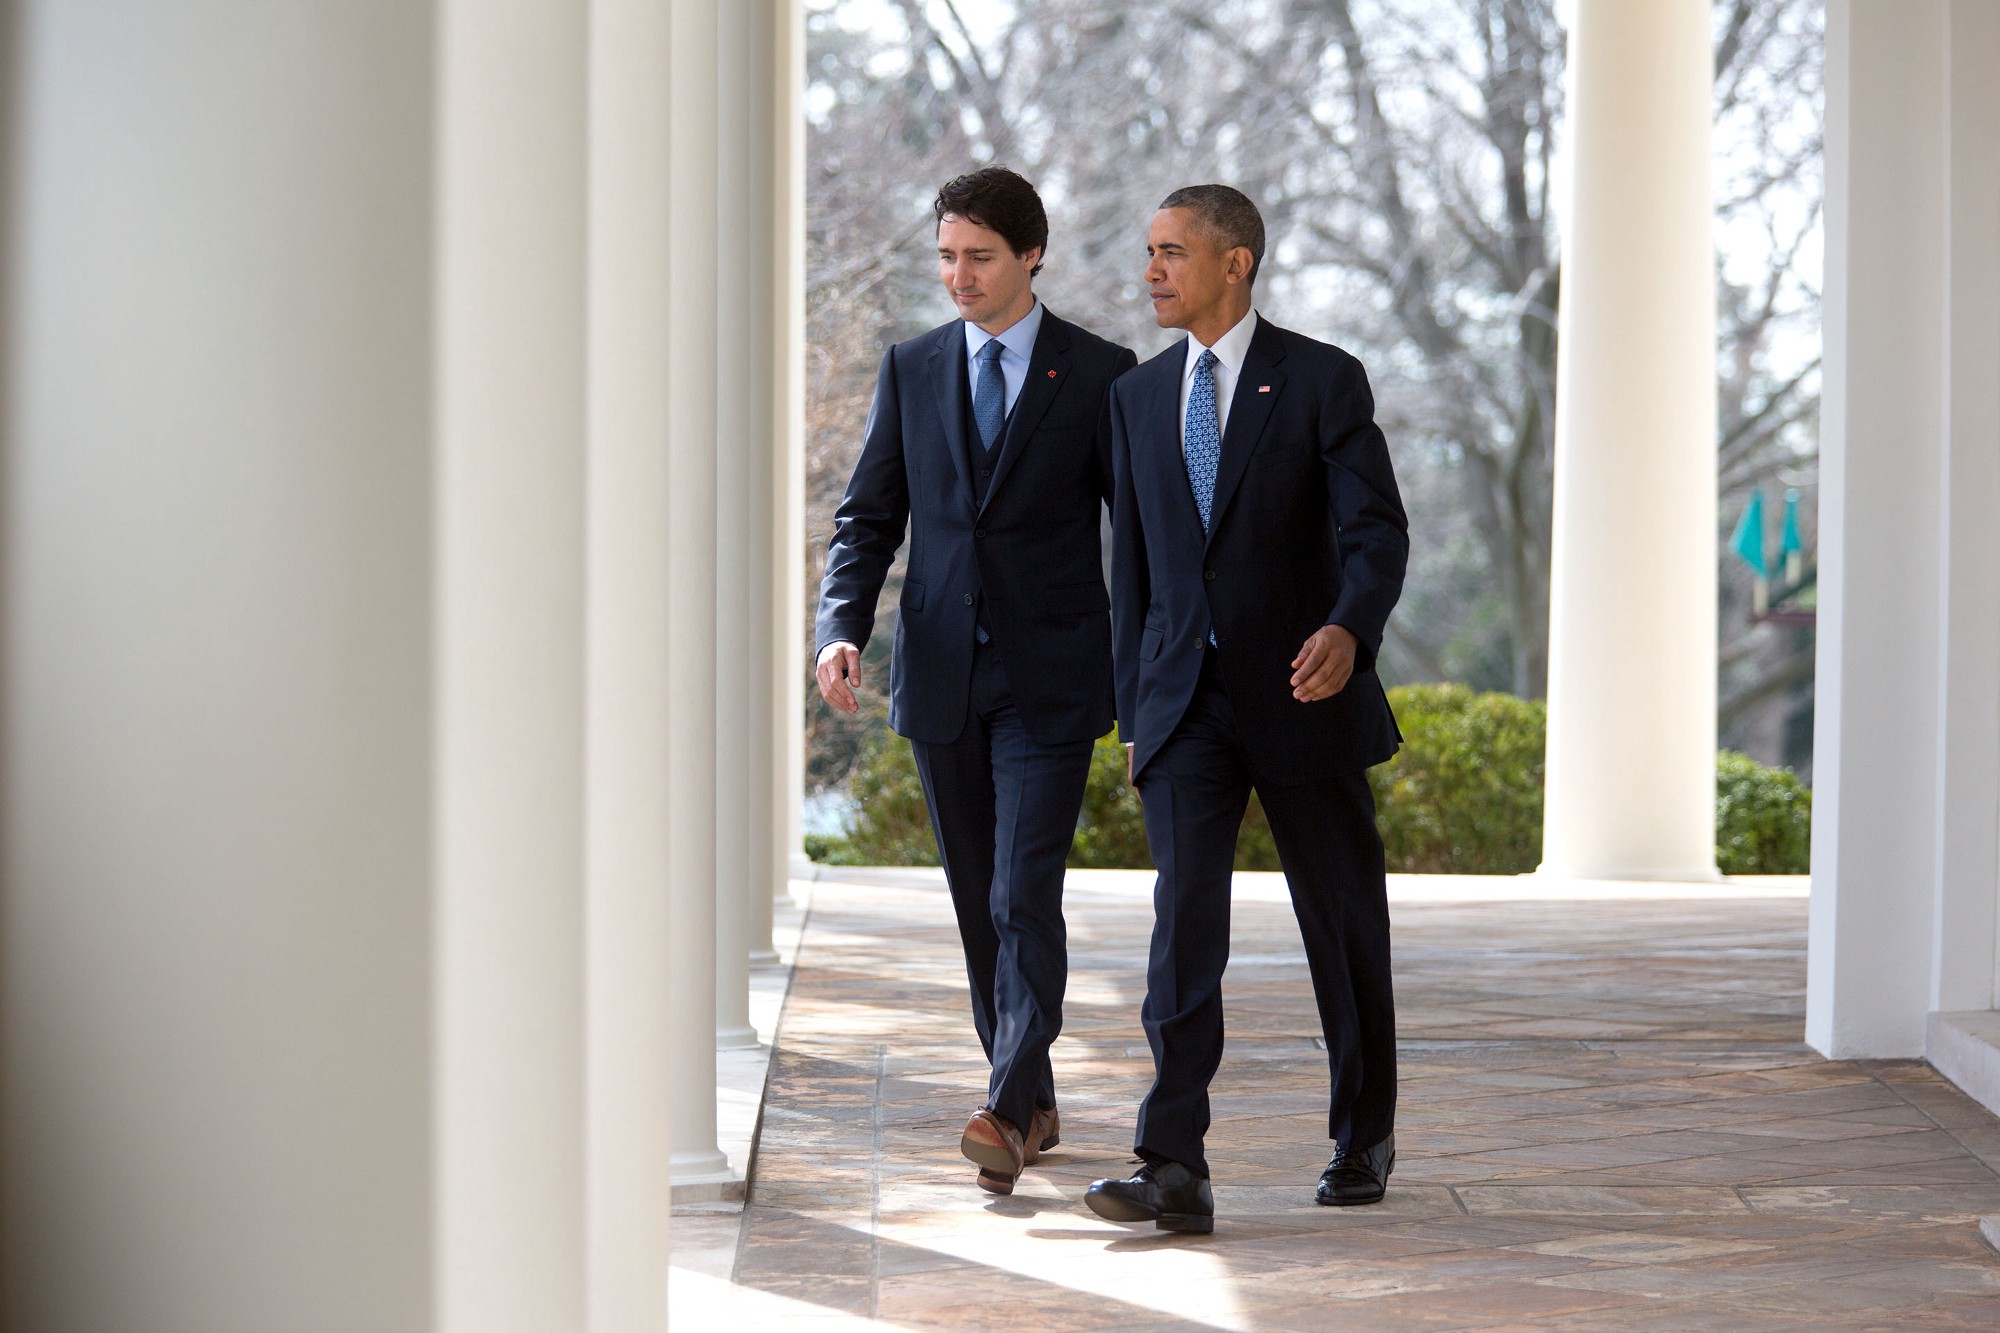 Canadian Prime Minister and U.S. President Barack Obama walk from the Oval Office to the Rose Garden for their joint press conference in Washington D.C. on March 10, 2016. (Official White House Photo by Lawrence Jackson)